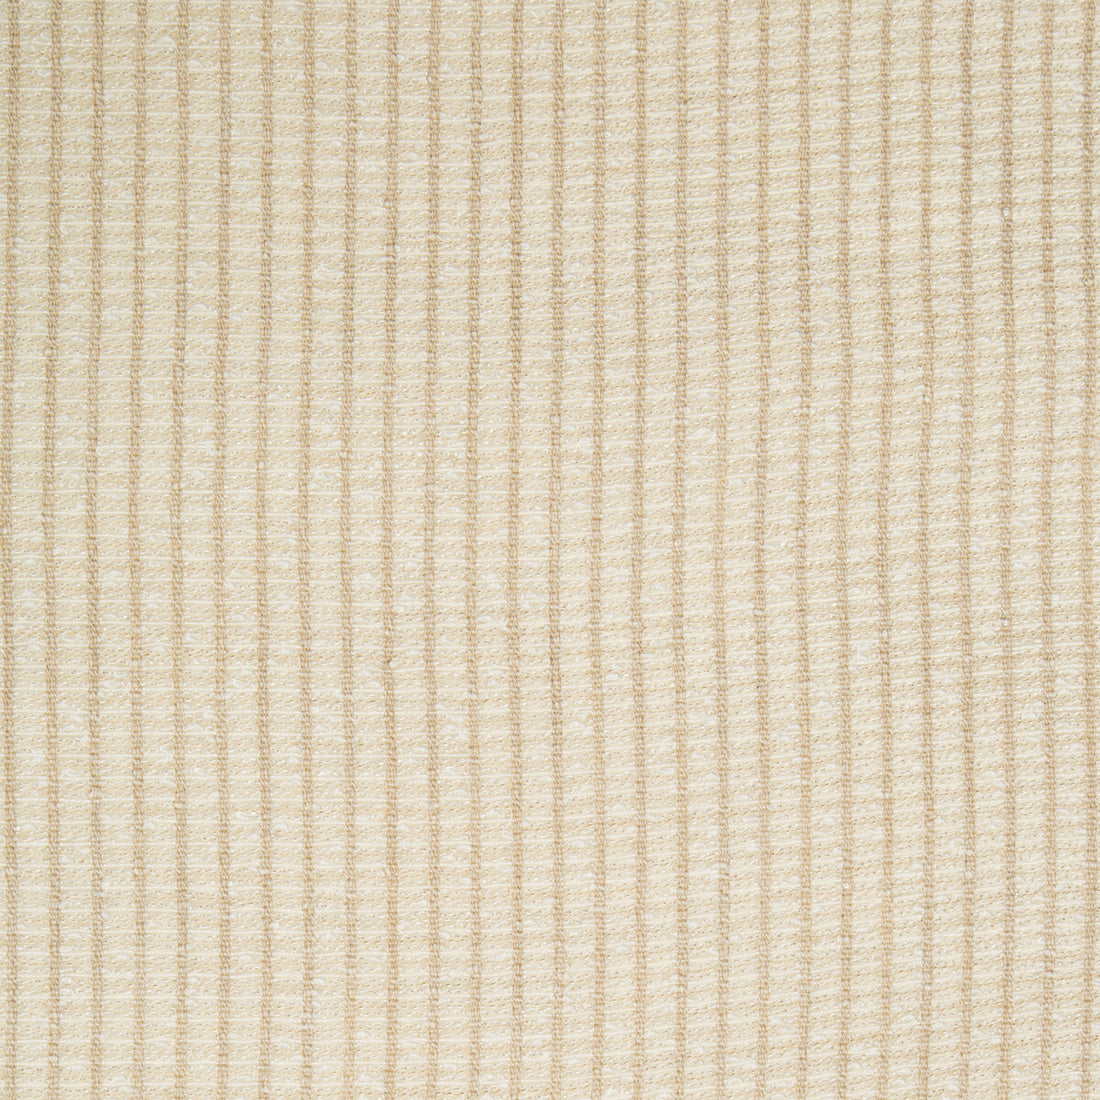 Striped Melange fabric in flax color - pattern 4419.16.0 - by Kravet Couture